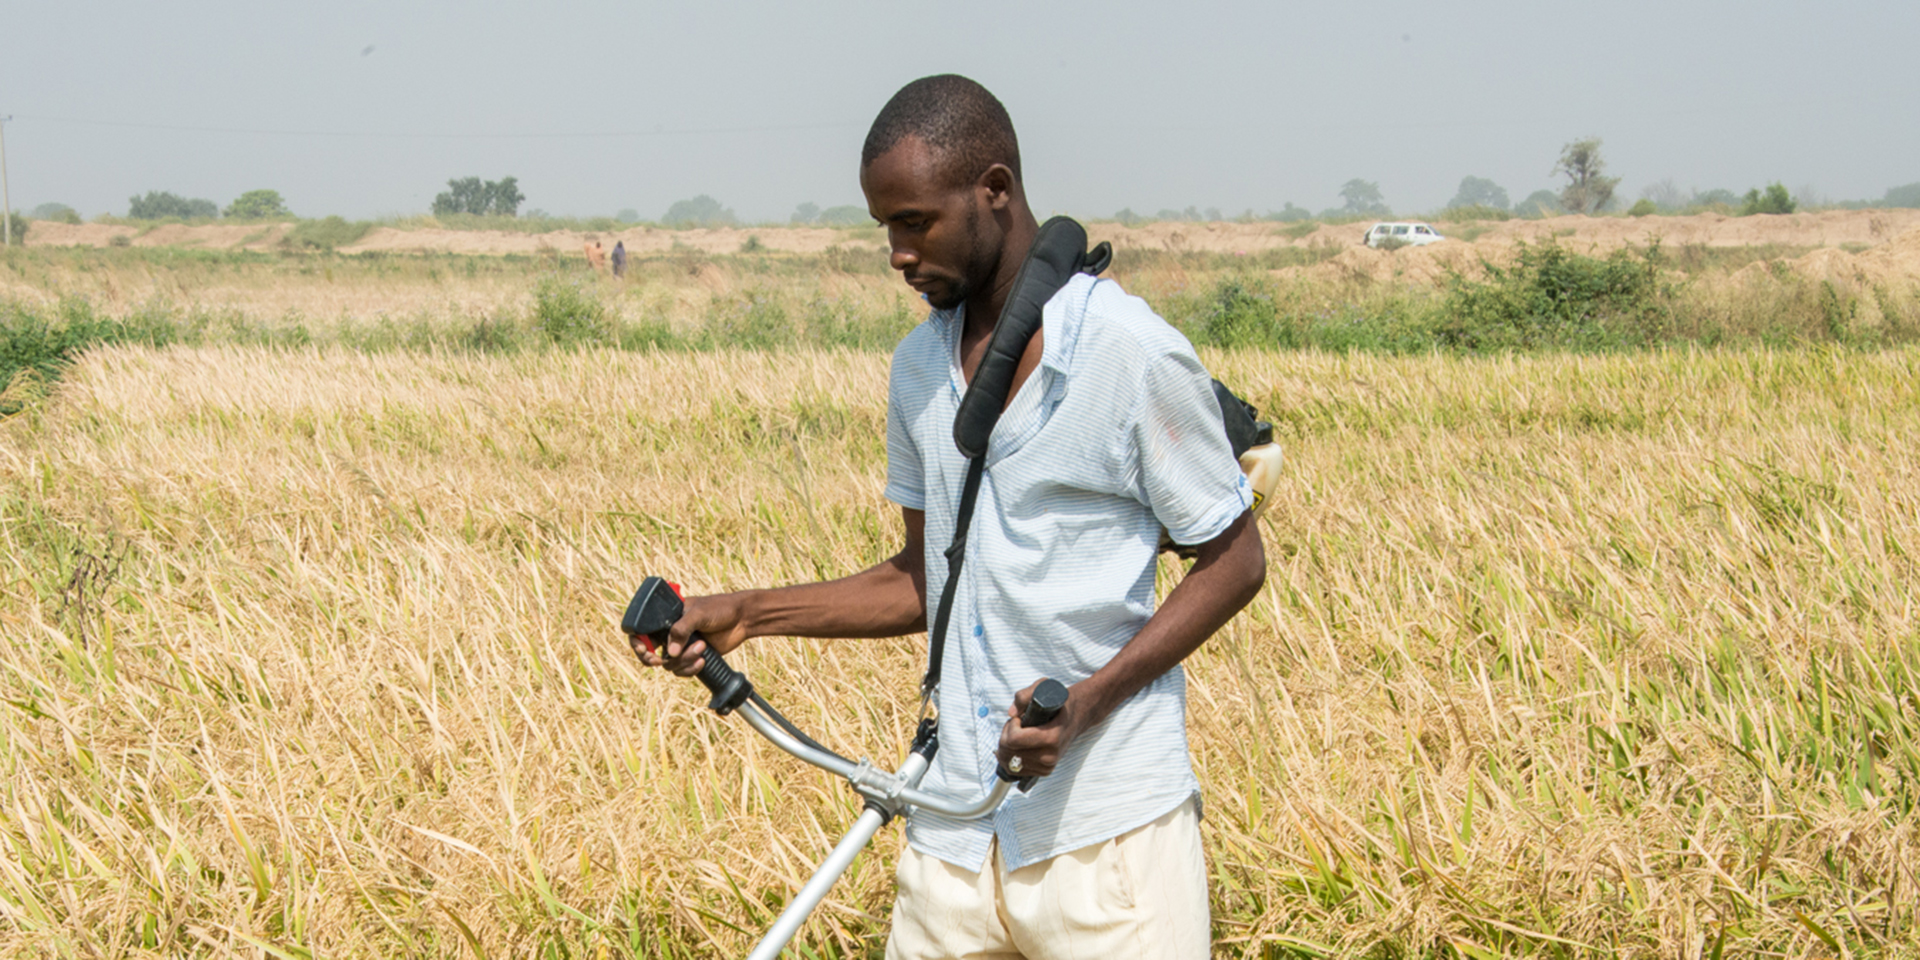 Aliyu Sambo Aliyu demonstrates how to harvest rice with a motorized reaper during a MARKETS II training event in Jigawa state on Nov. 24, 2016.